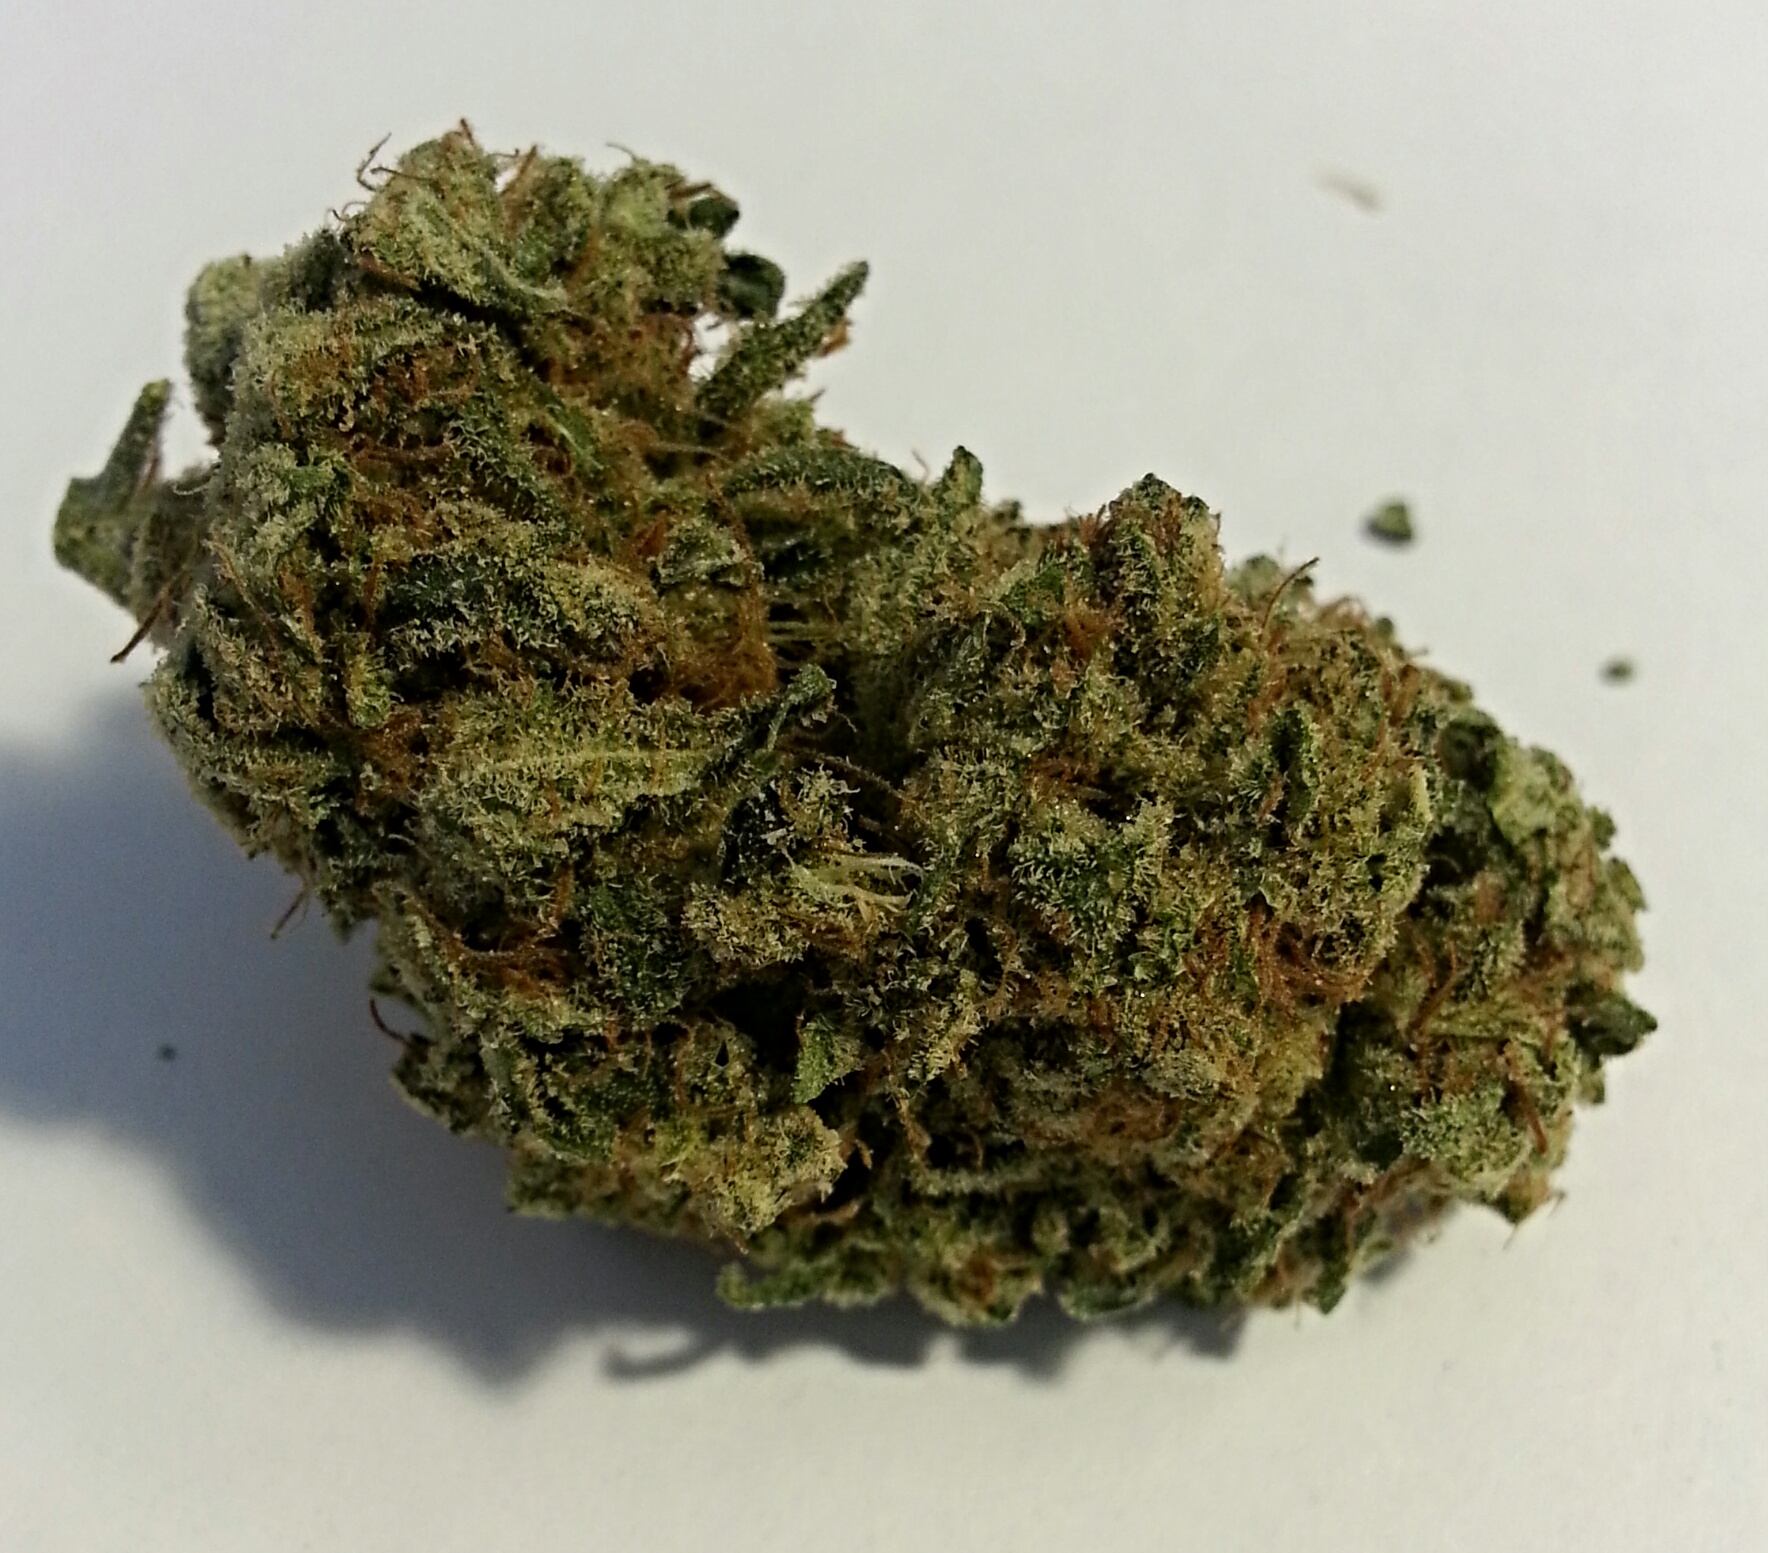 Great White from The Limelight Medical Marijuana Review